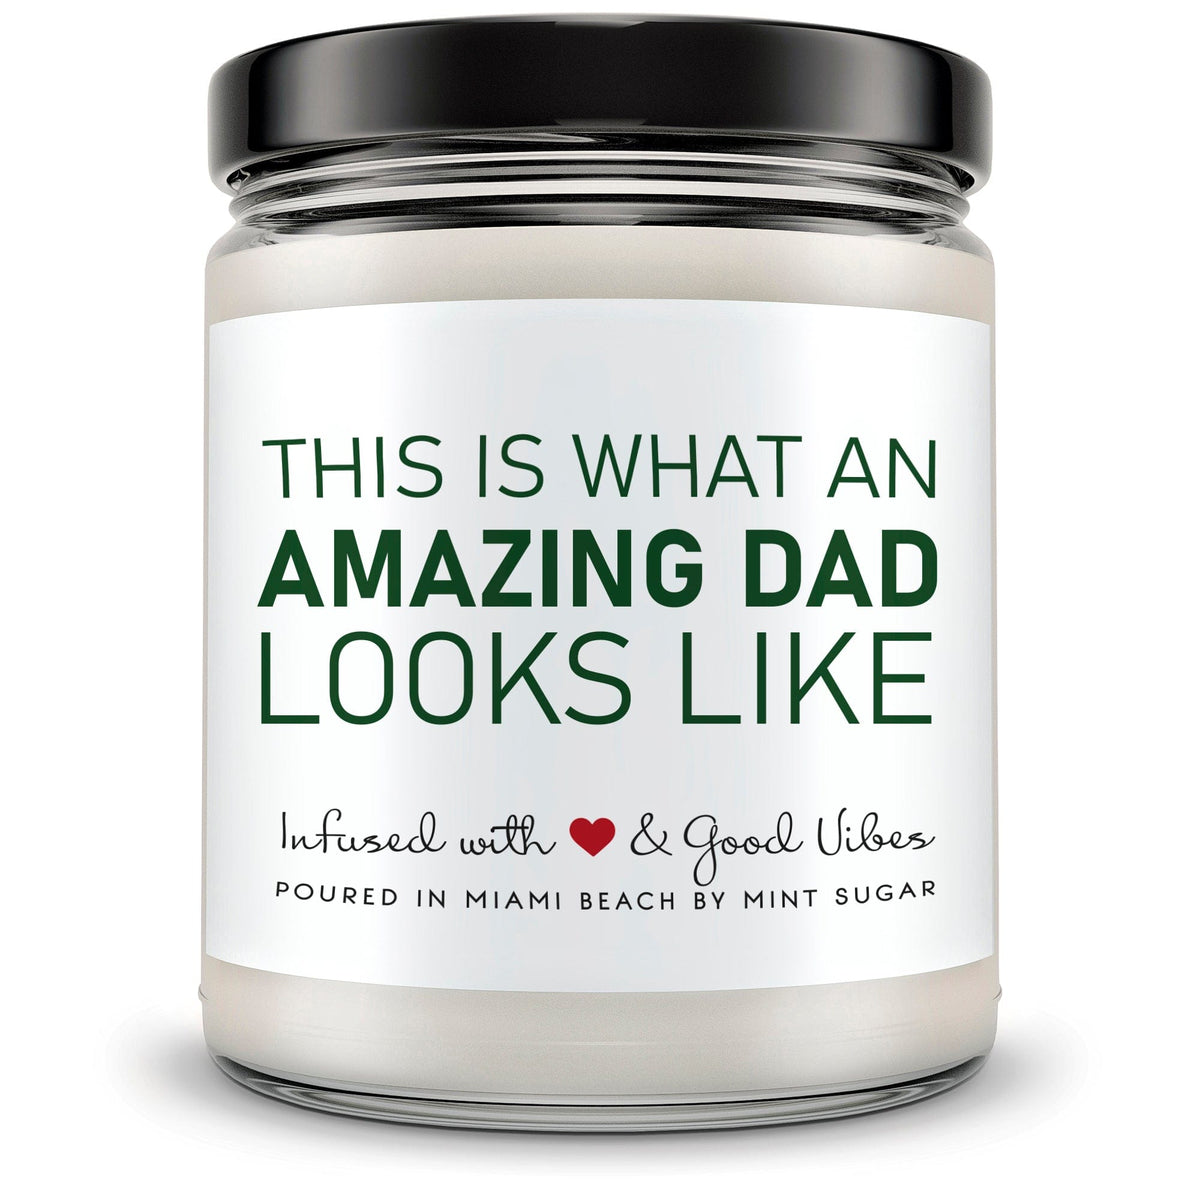 This is What an Amazing Dad Looks Like - Mint Sugar Candle